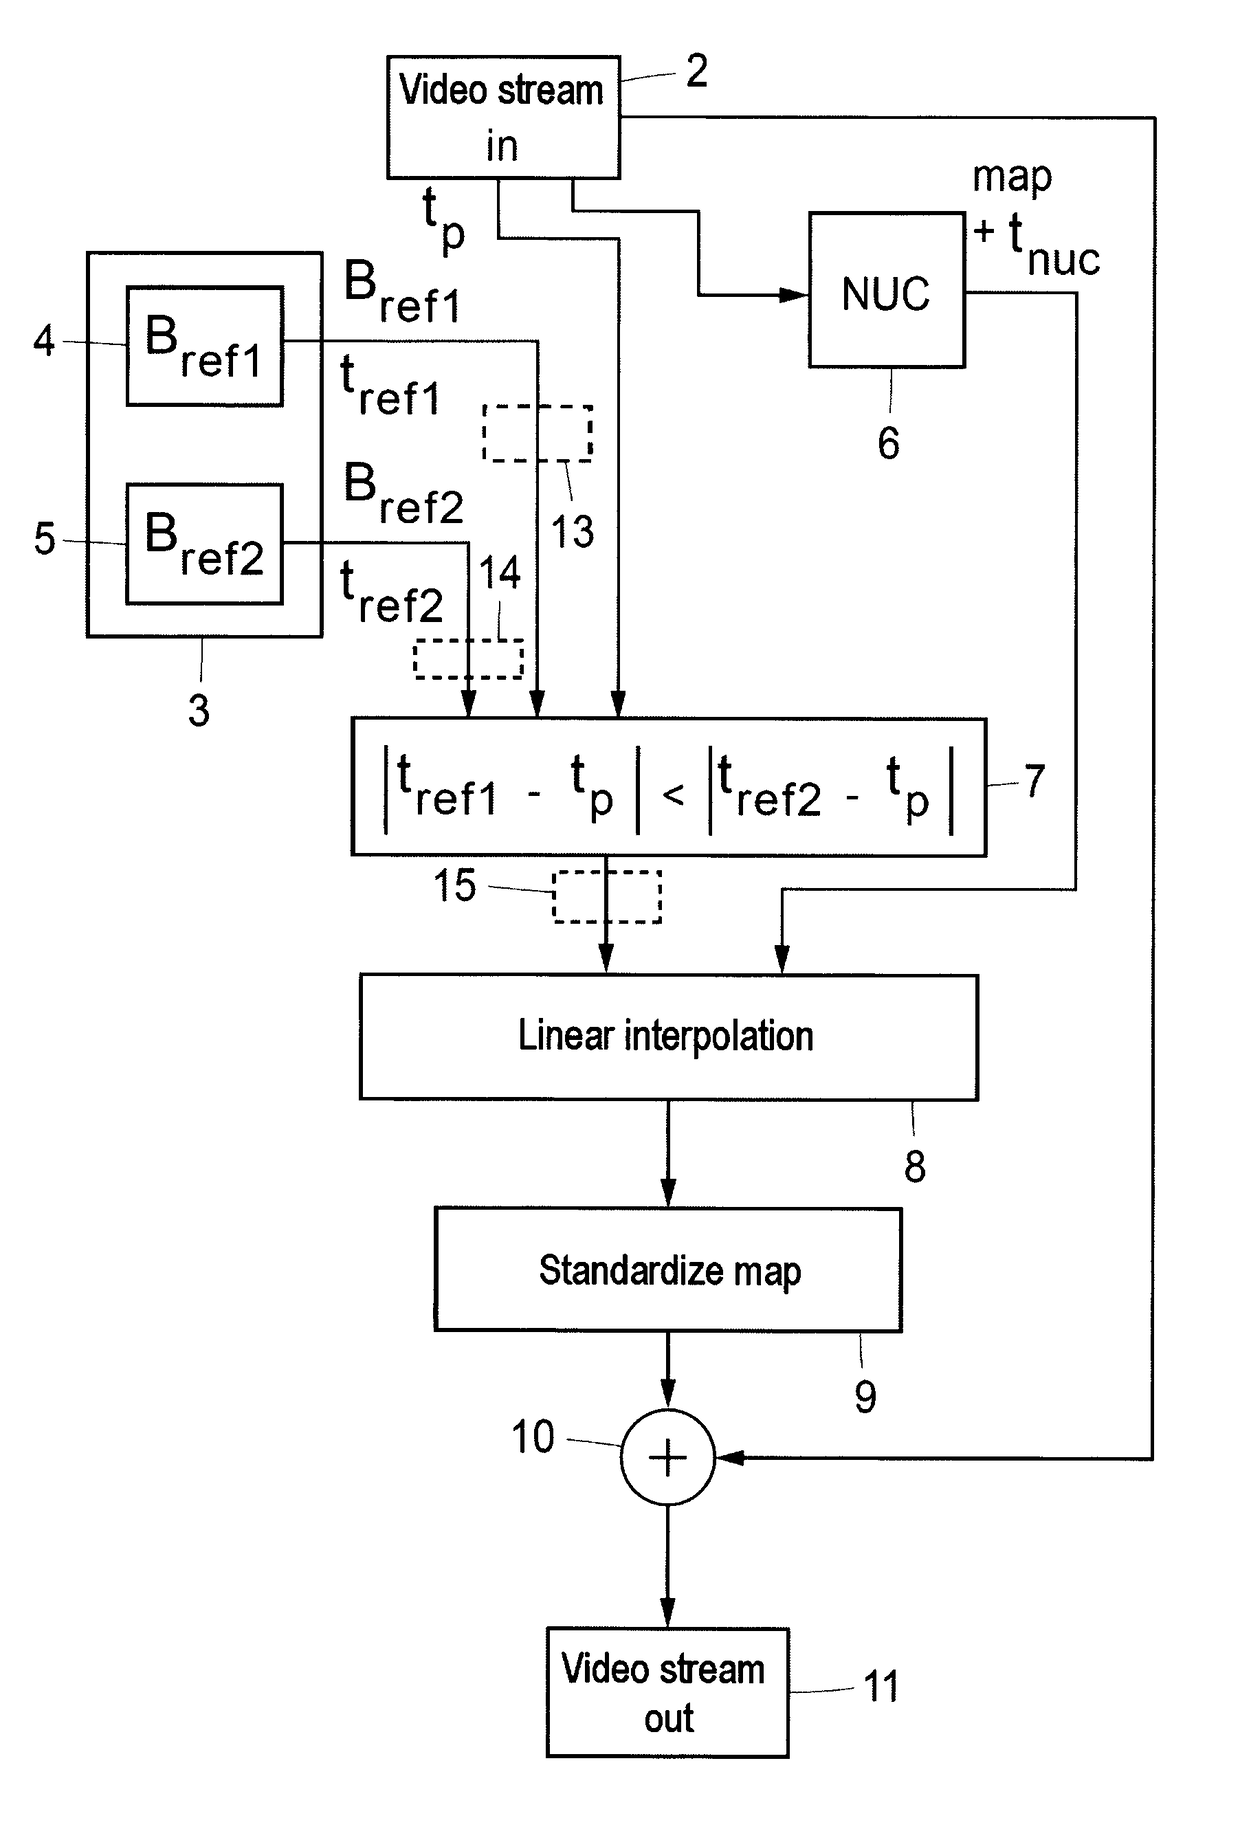 Procedure for mapping when capturing video streams by means of a camera